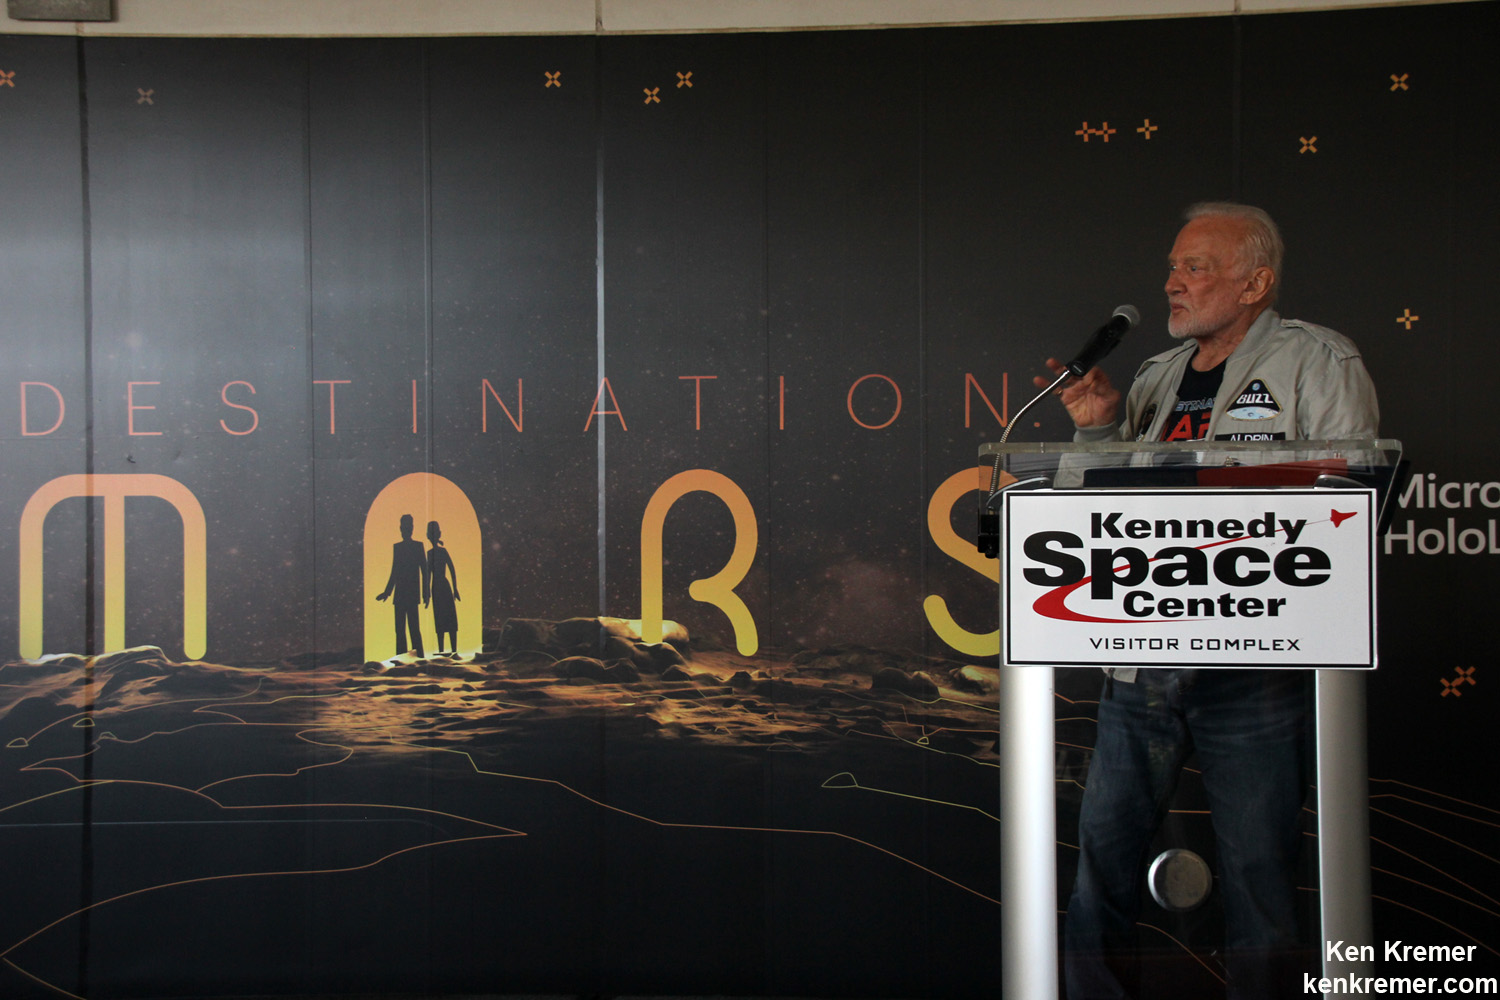 Apollo 11 moonwalker Buzz Aldrin describes newly opened ‘Destination Mars’ holographic experience during media preview at the Kennedy Space Center visitor complex in Florida on Sept. 18, 2016.